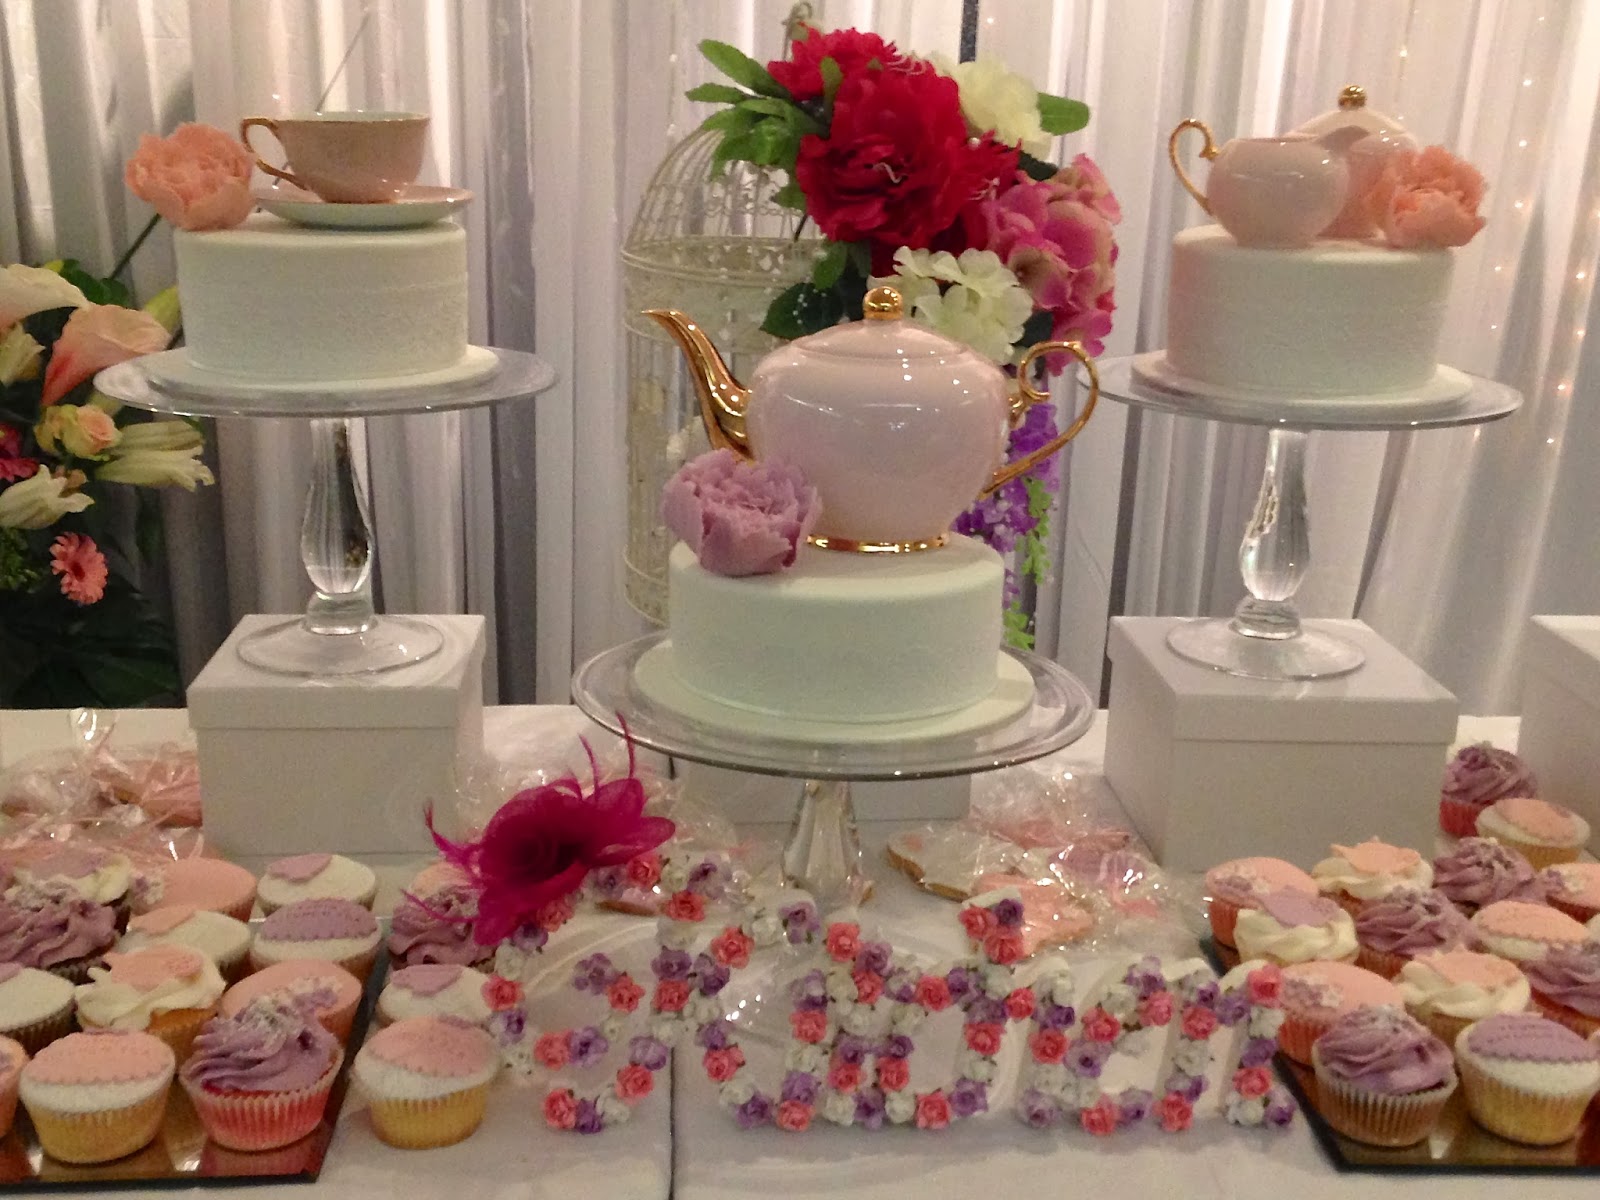  Party  Ideas  Pretty in pink floral kitchen tea  ideas  